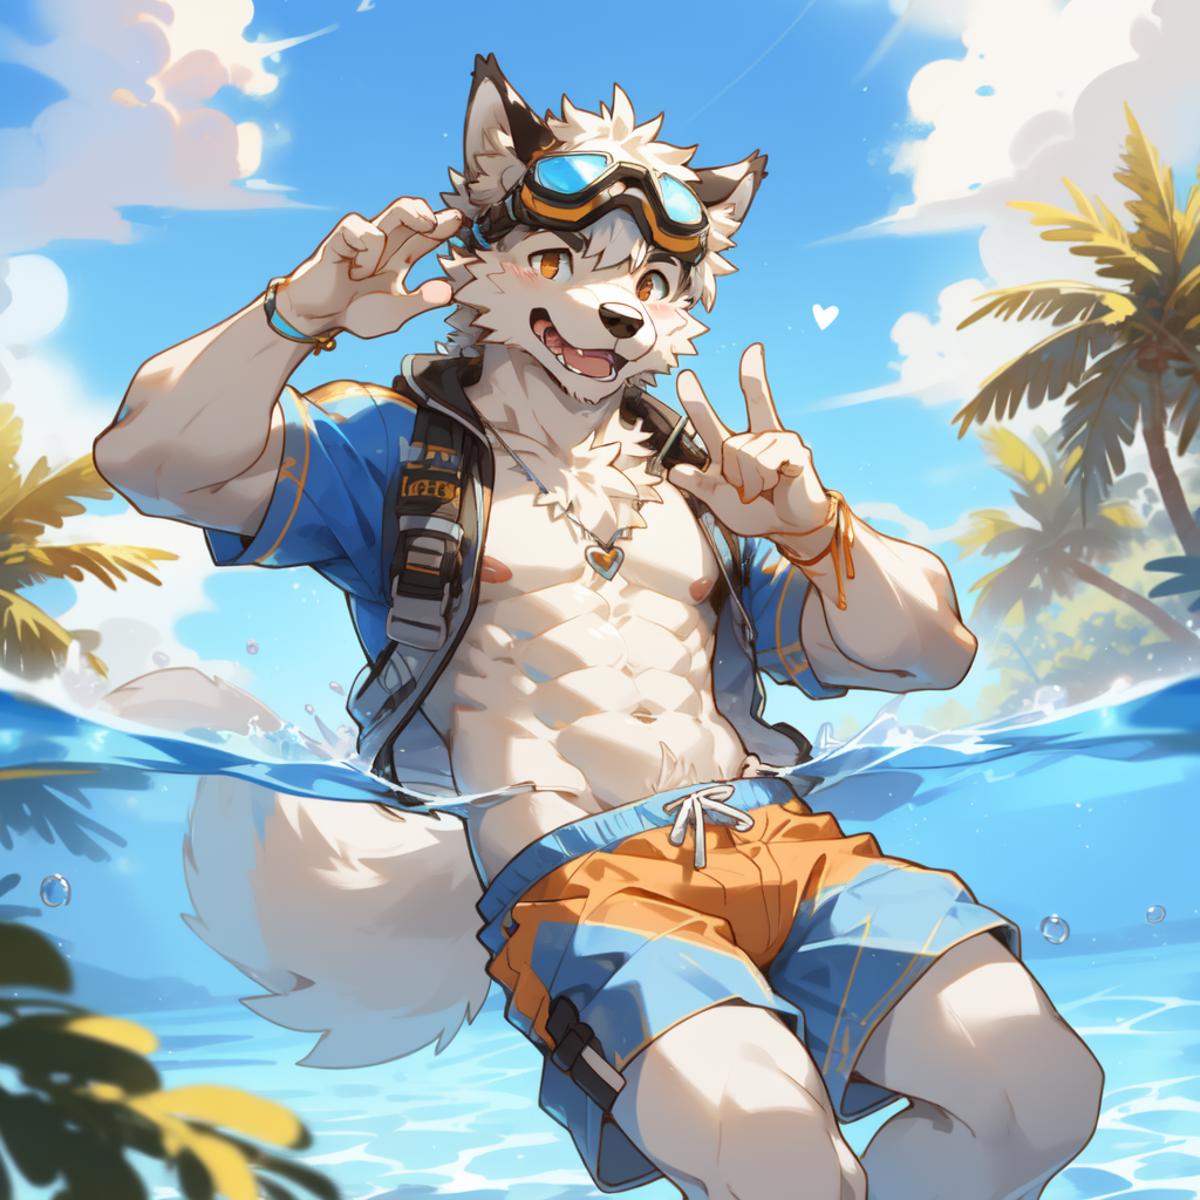 A shirtless man with goggles and a wolf's head wearing a blue shirt and shorts is sitting in the water.